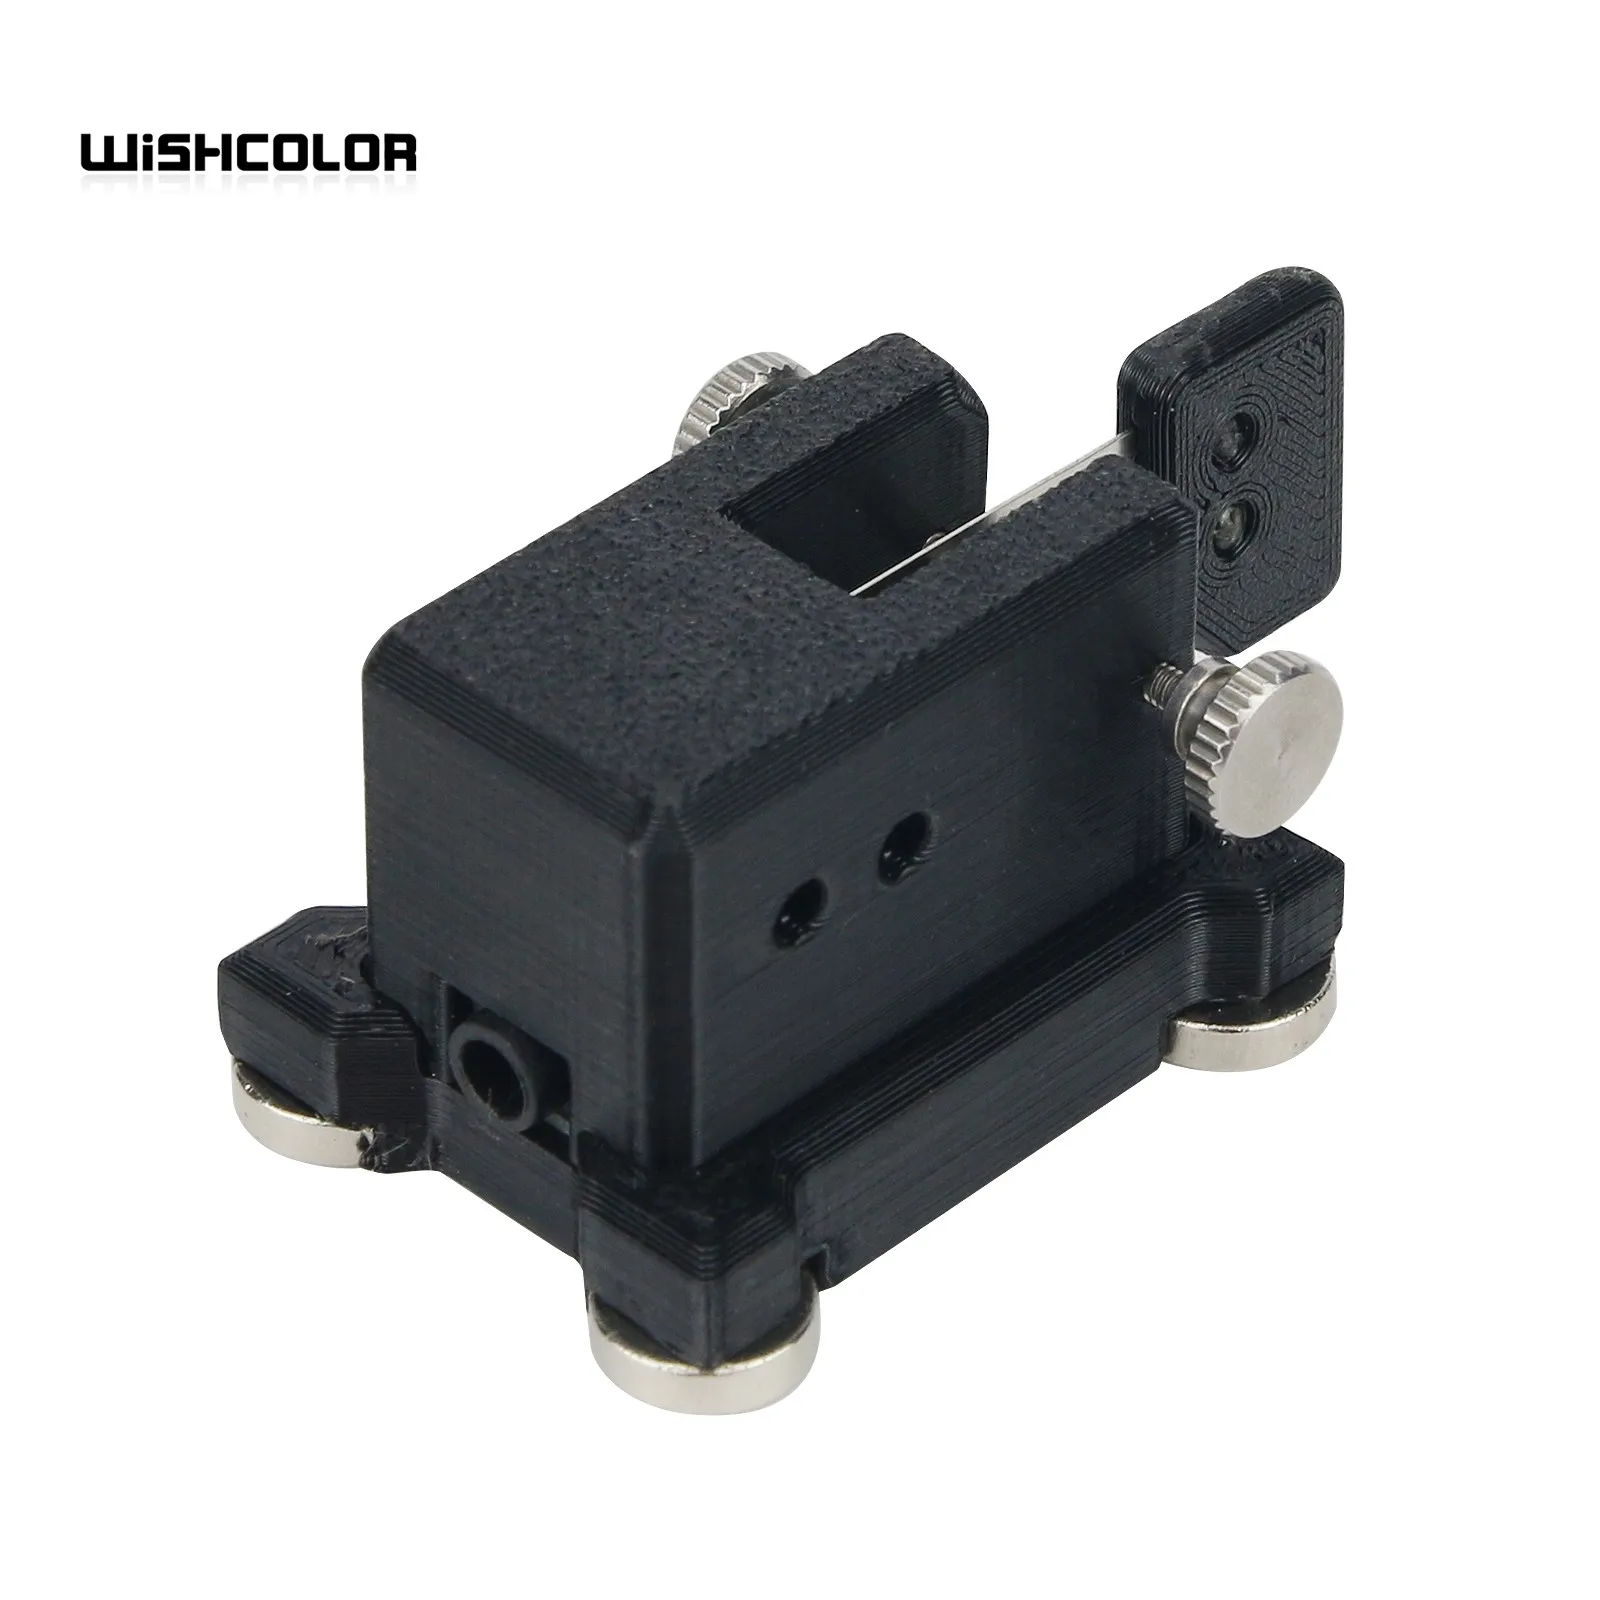 

Wishcolor CH-5030 Single Paddle Key Automatic CW Key Morse Key with Magnetic Base for Transceiver Mobile Radio